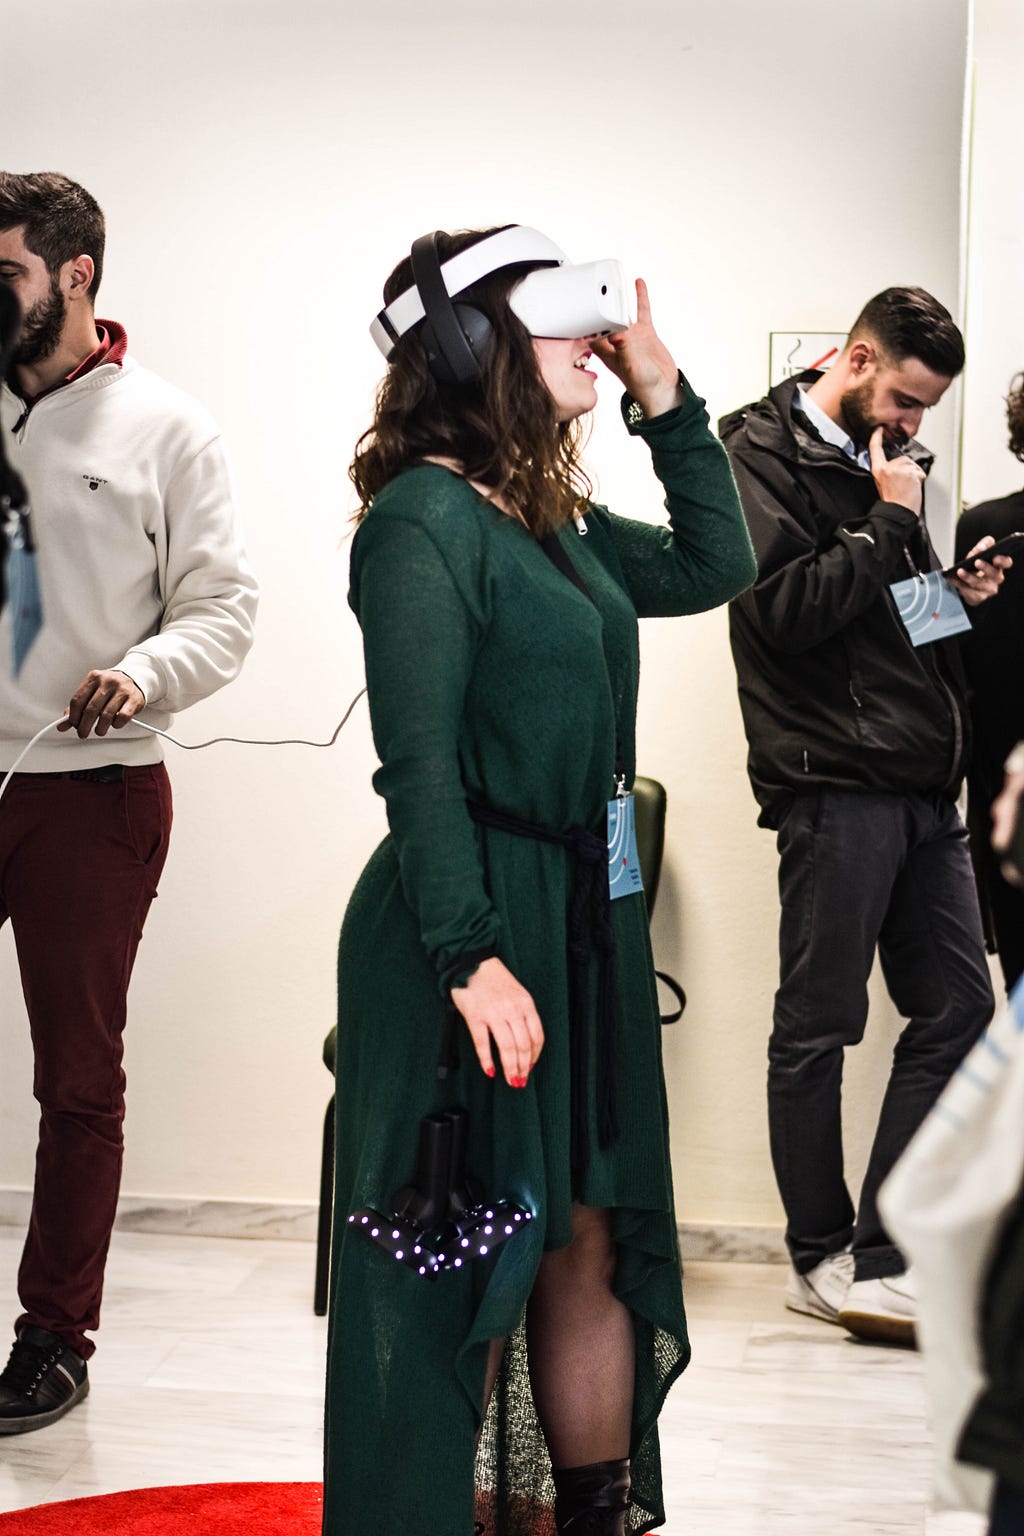 young woman wearing a long green dress wearing a VR headset in a group of other young people